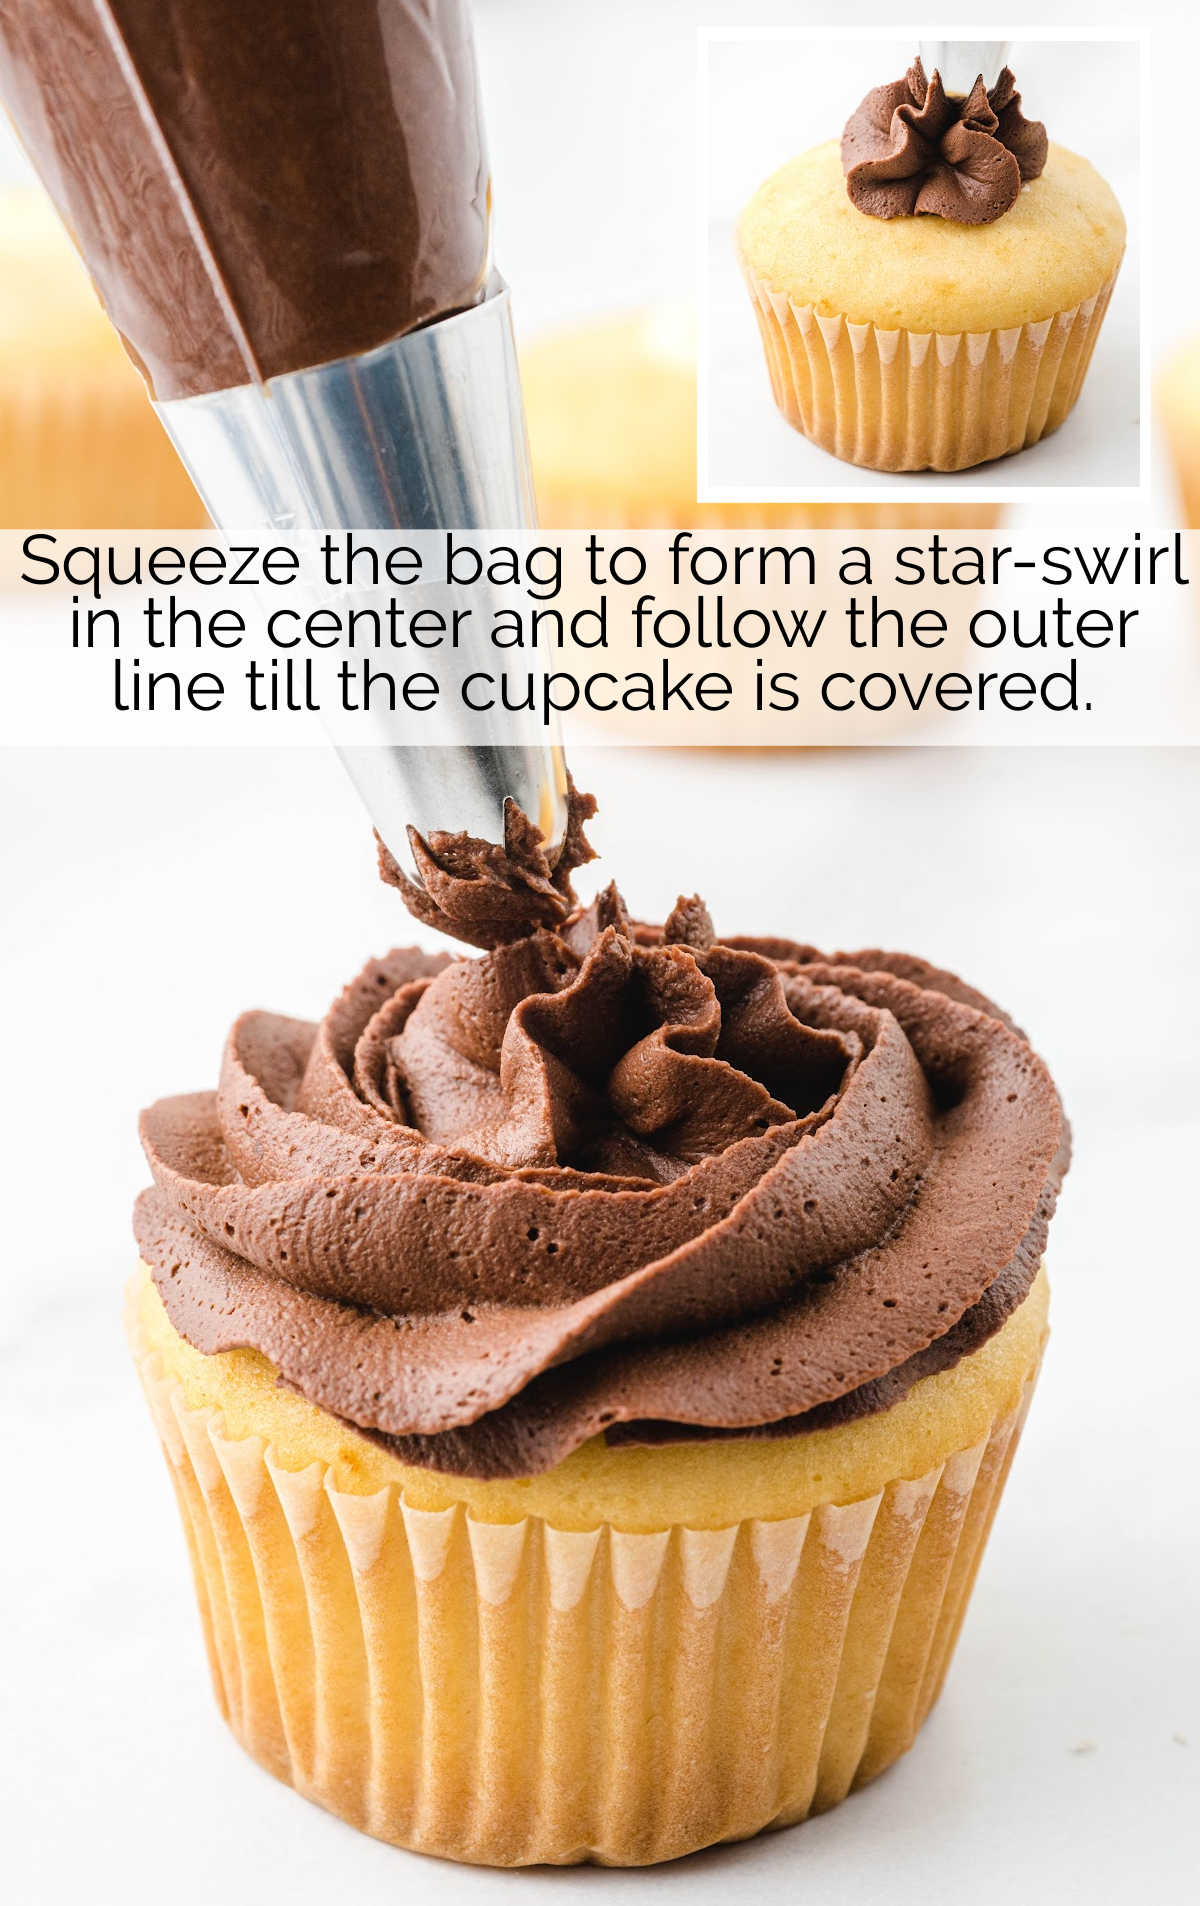 cupcake topped with ganache frosting